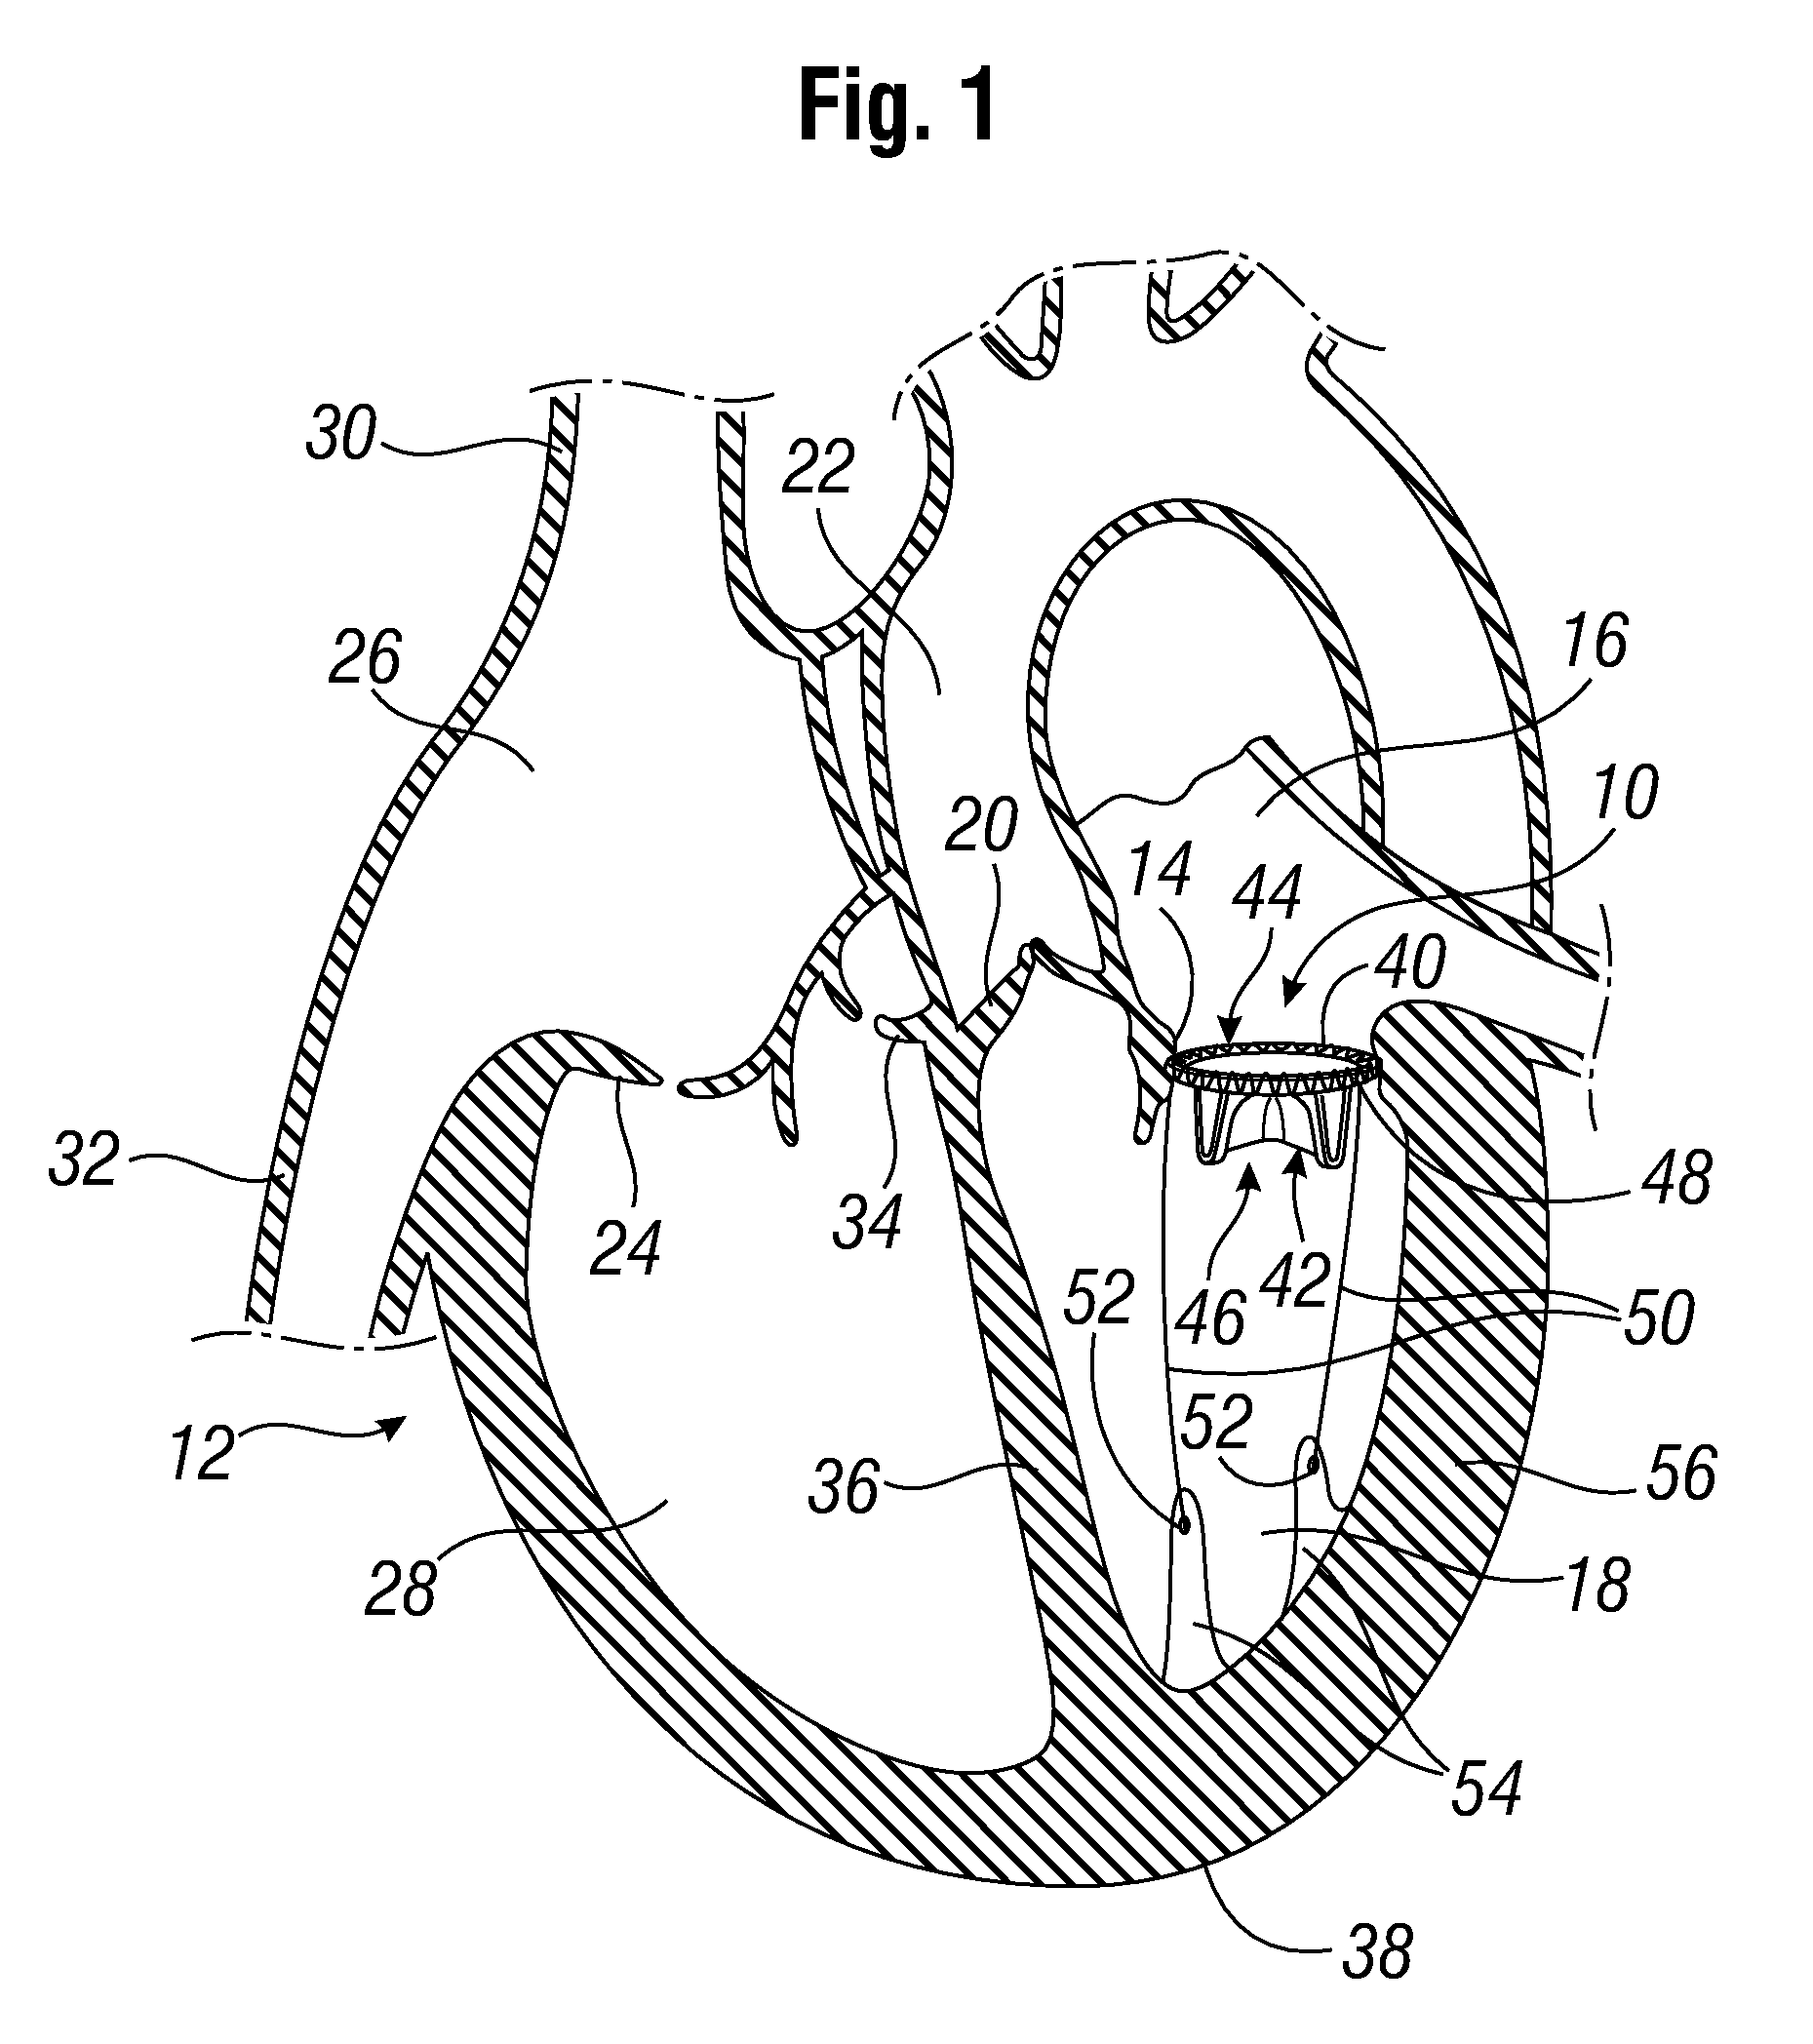 Prosthetic valve with ventricular tethers